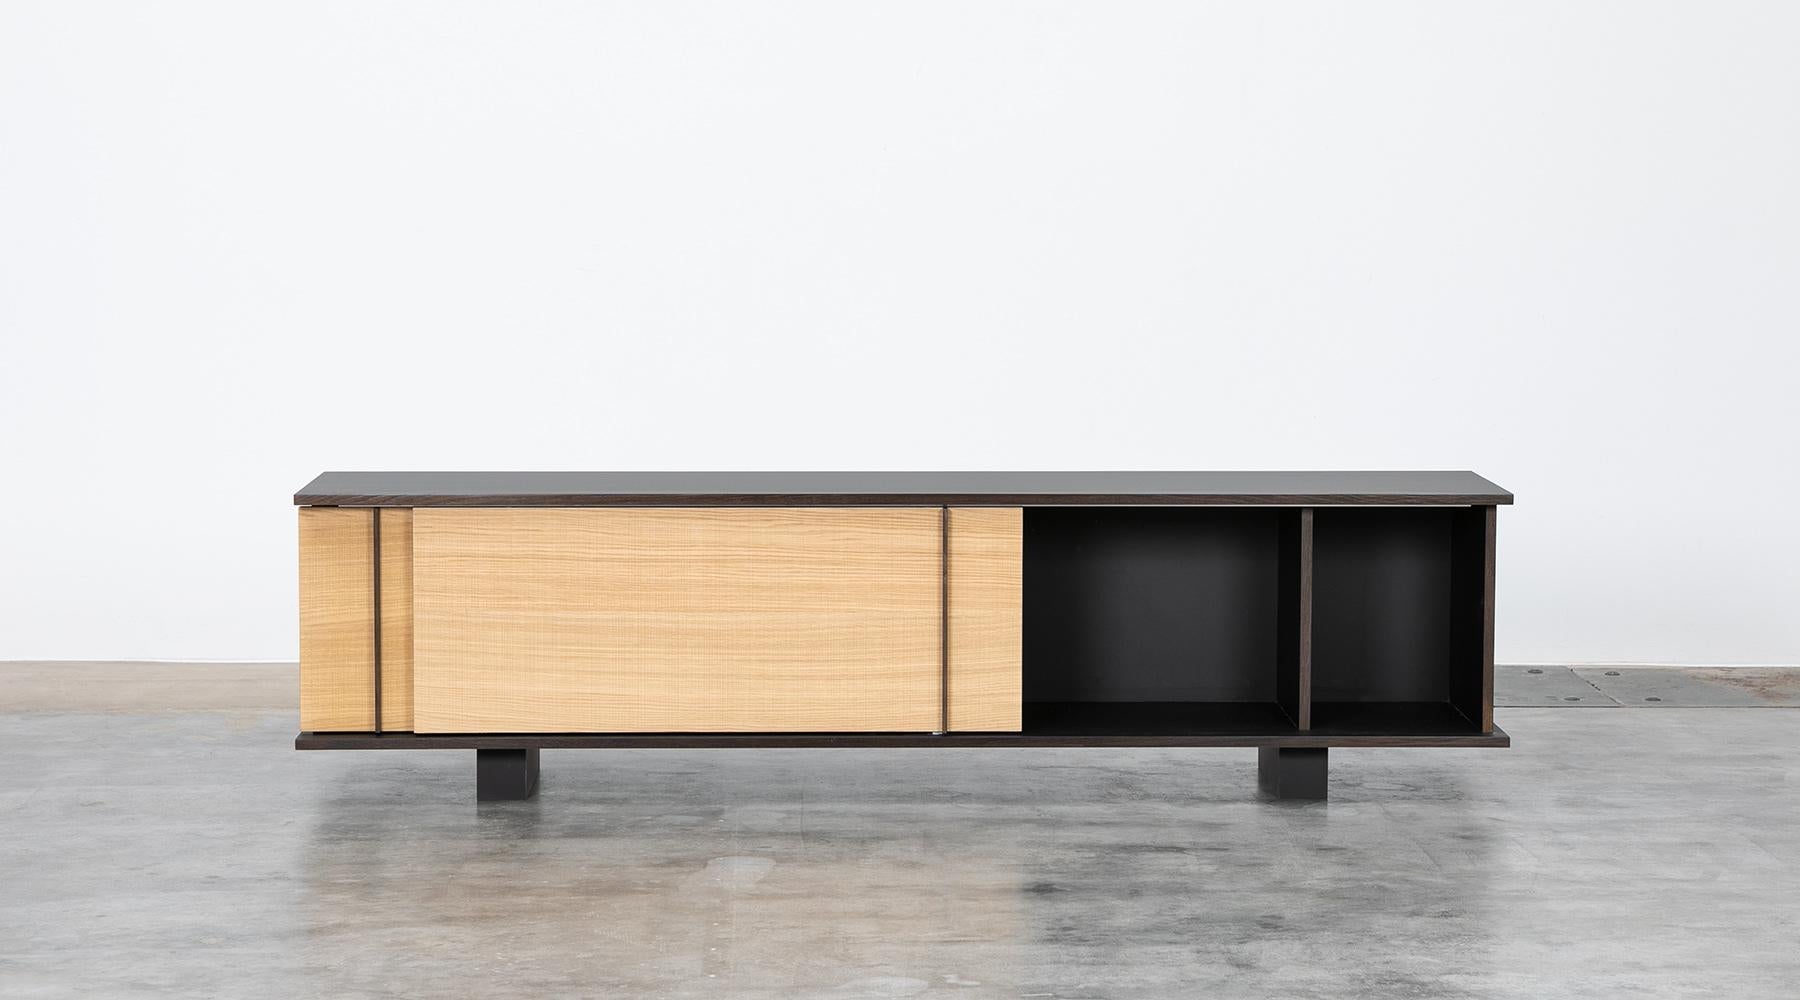 Sideboard by contemporary German artist Johannes Hock. The sliding doors of this unique piece are made of German oak wood with ebony handles, the body is made of black HPL, as well as the backside. Manufactured by Atelier Johannes Hock.